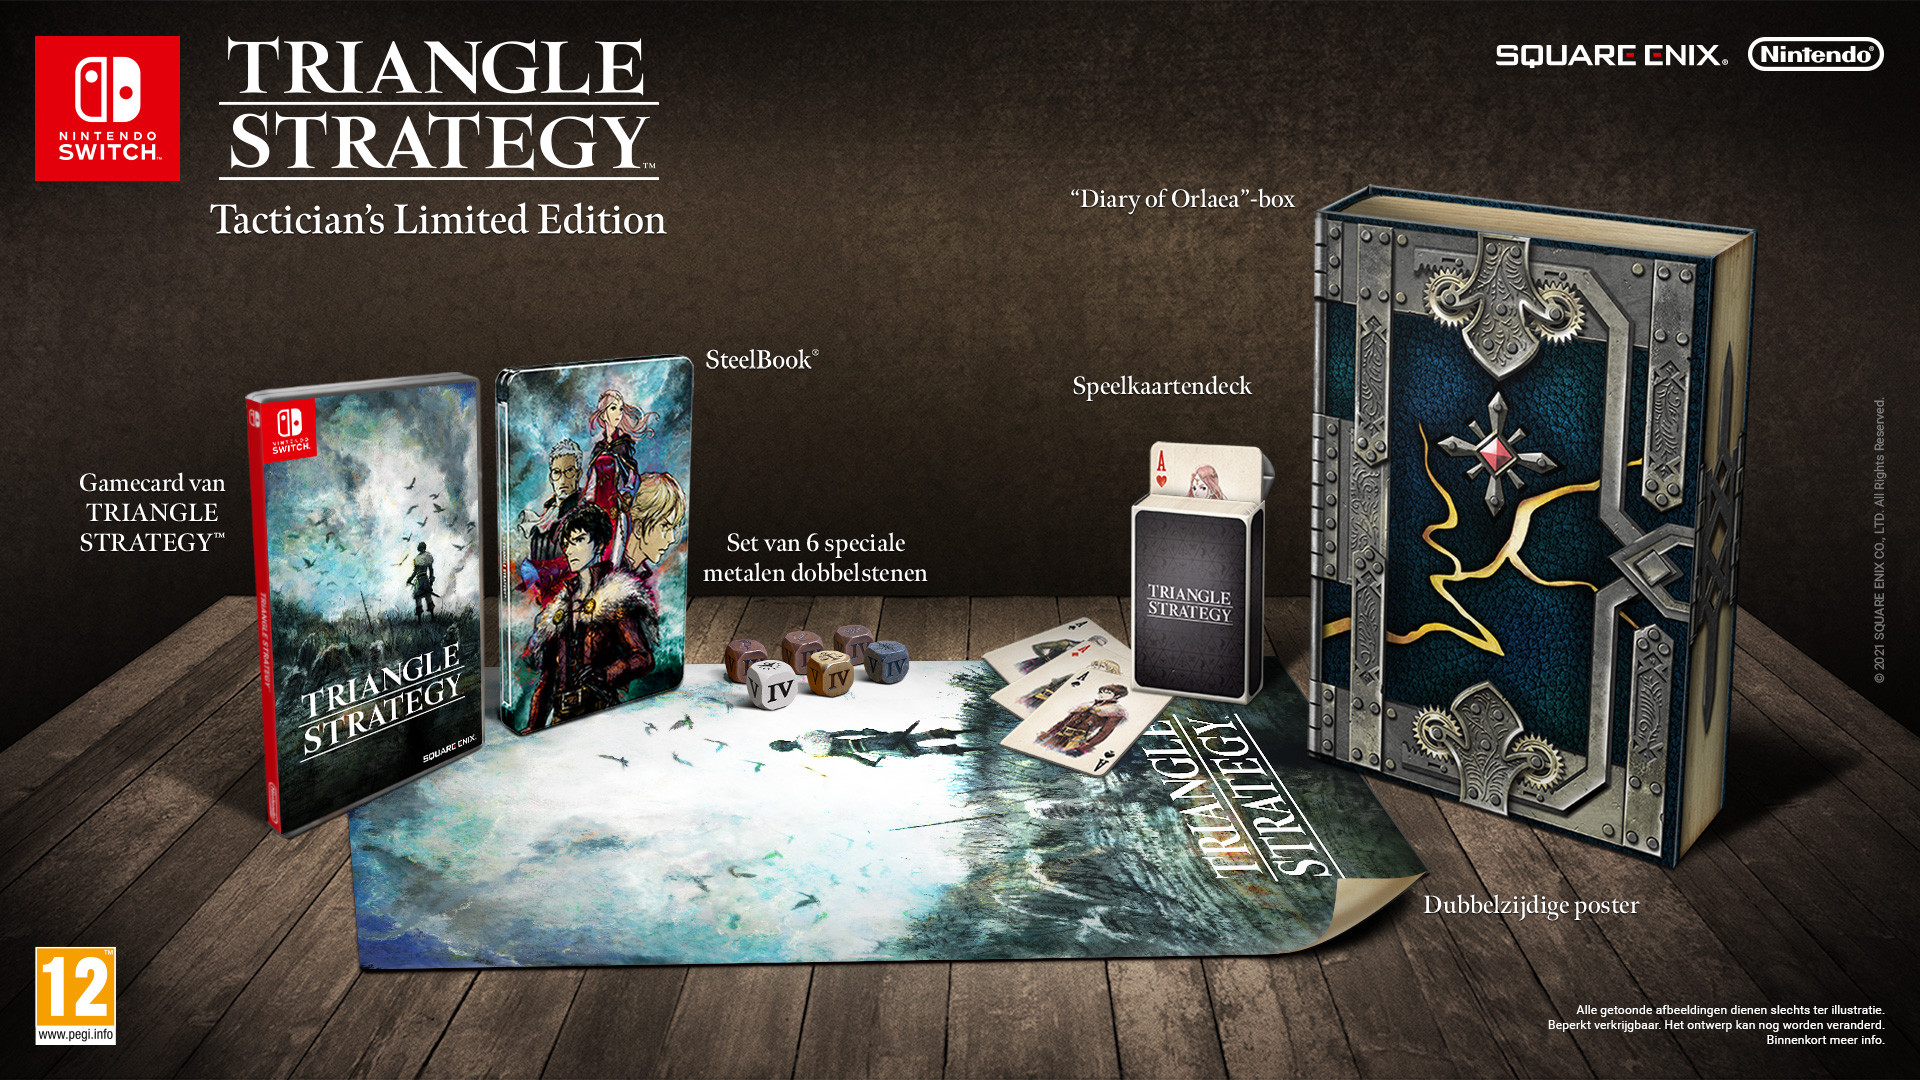 Triangle Strategy Tactician's Limited Edition kopen?